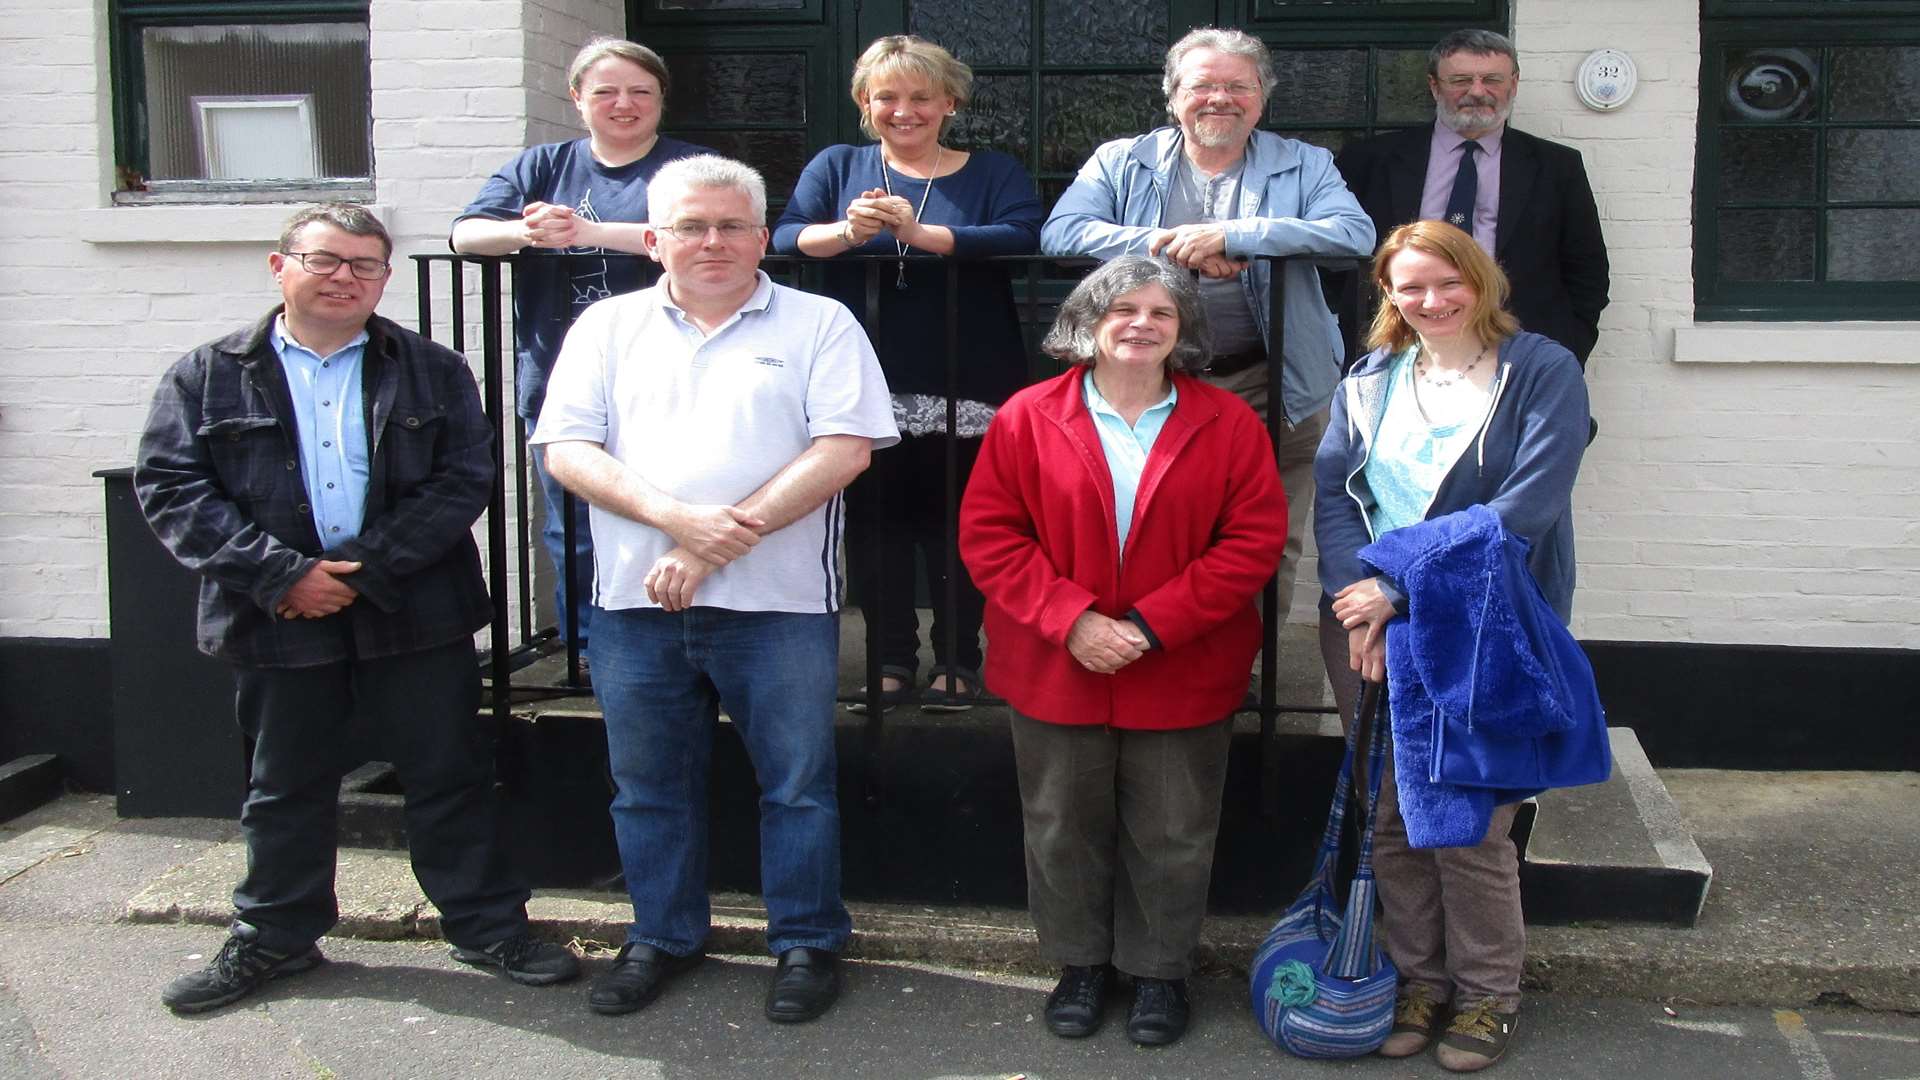 Gravesend Bell Ringers (back row from left to right): Helen Webb, Julie McDonnell, Terry Barnard, Alan Pink; (front row from left to right): Nick Wheeler, Alex Britton, Louise Pink, Anita Perryman